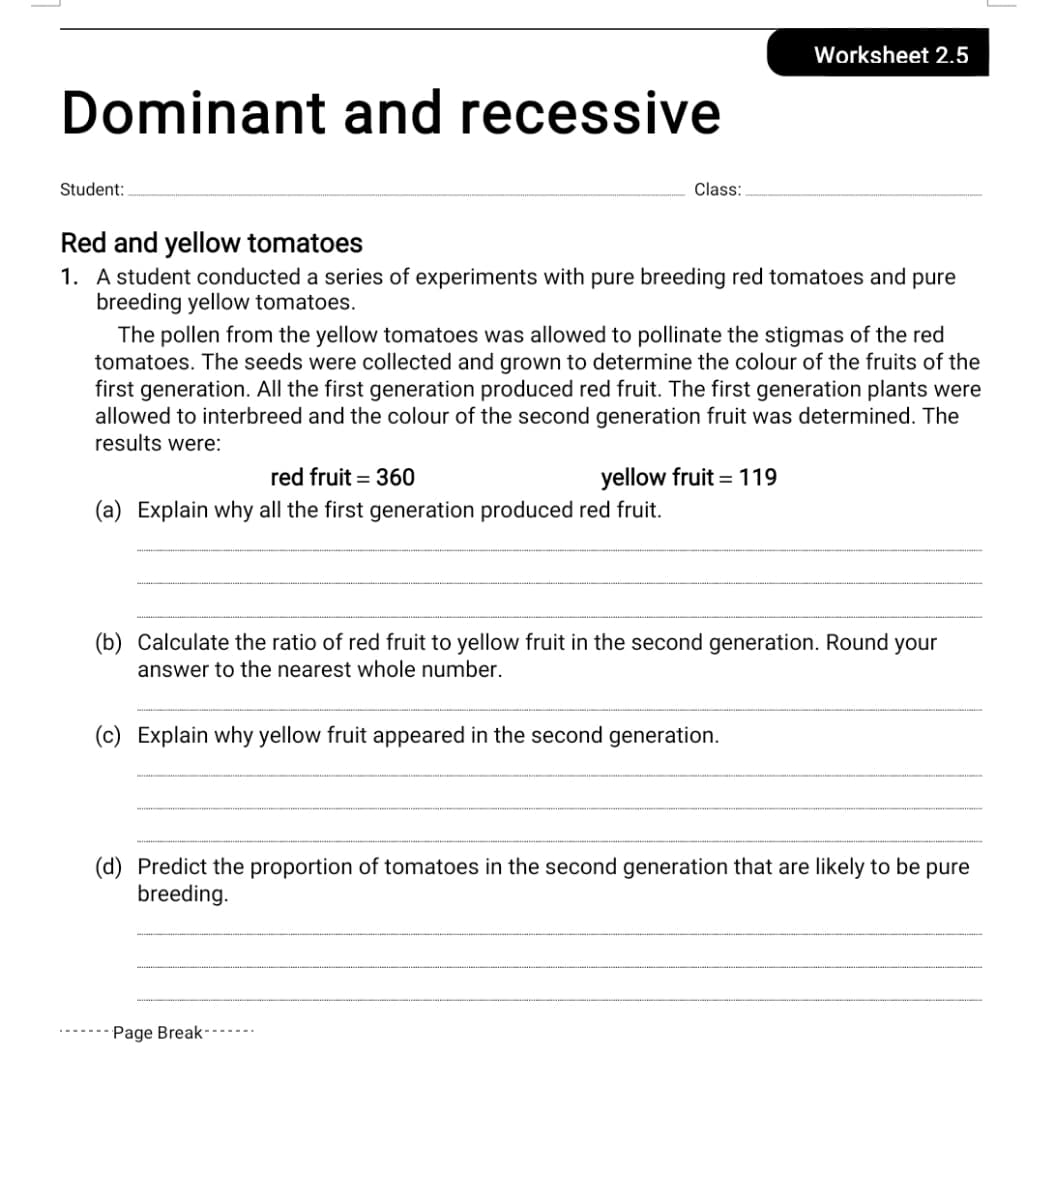 Worksheet 2.5
Dominant and recessive
Student:
Class:
Red and yellow tomatoes
1. A student conducted a series of experiments with pure breeding red tomatoes and pure
breeding yellow tomatoes.
The pollen from the yellow tomatoes was allowed to pollinate the stigmas of the red
tomatoes. The seeds were collected and grown to determine the colour of the fruits of the
first generation. All the first generation produced red fruit. The first generation plants were
allowed to interbreed and the colour of the second generation fruit was determined. The
results were:
red fruit = 360
yellow fruit = 119
(a) Explain why all the first generation produced red fruit.
(b) Calculate the ratio of red fruit to yellow fruit in the second generation. Round your
answer to the nearest whole number.
(c) Explain why yellow fruit appeared in the second generation.
(d) Predict the proportion of tomatoes in the second generation that are likely to be pure
breeding.
Page Break
